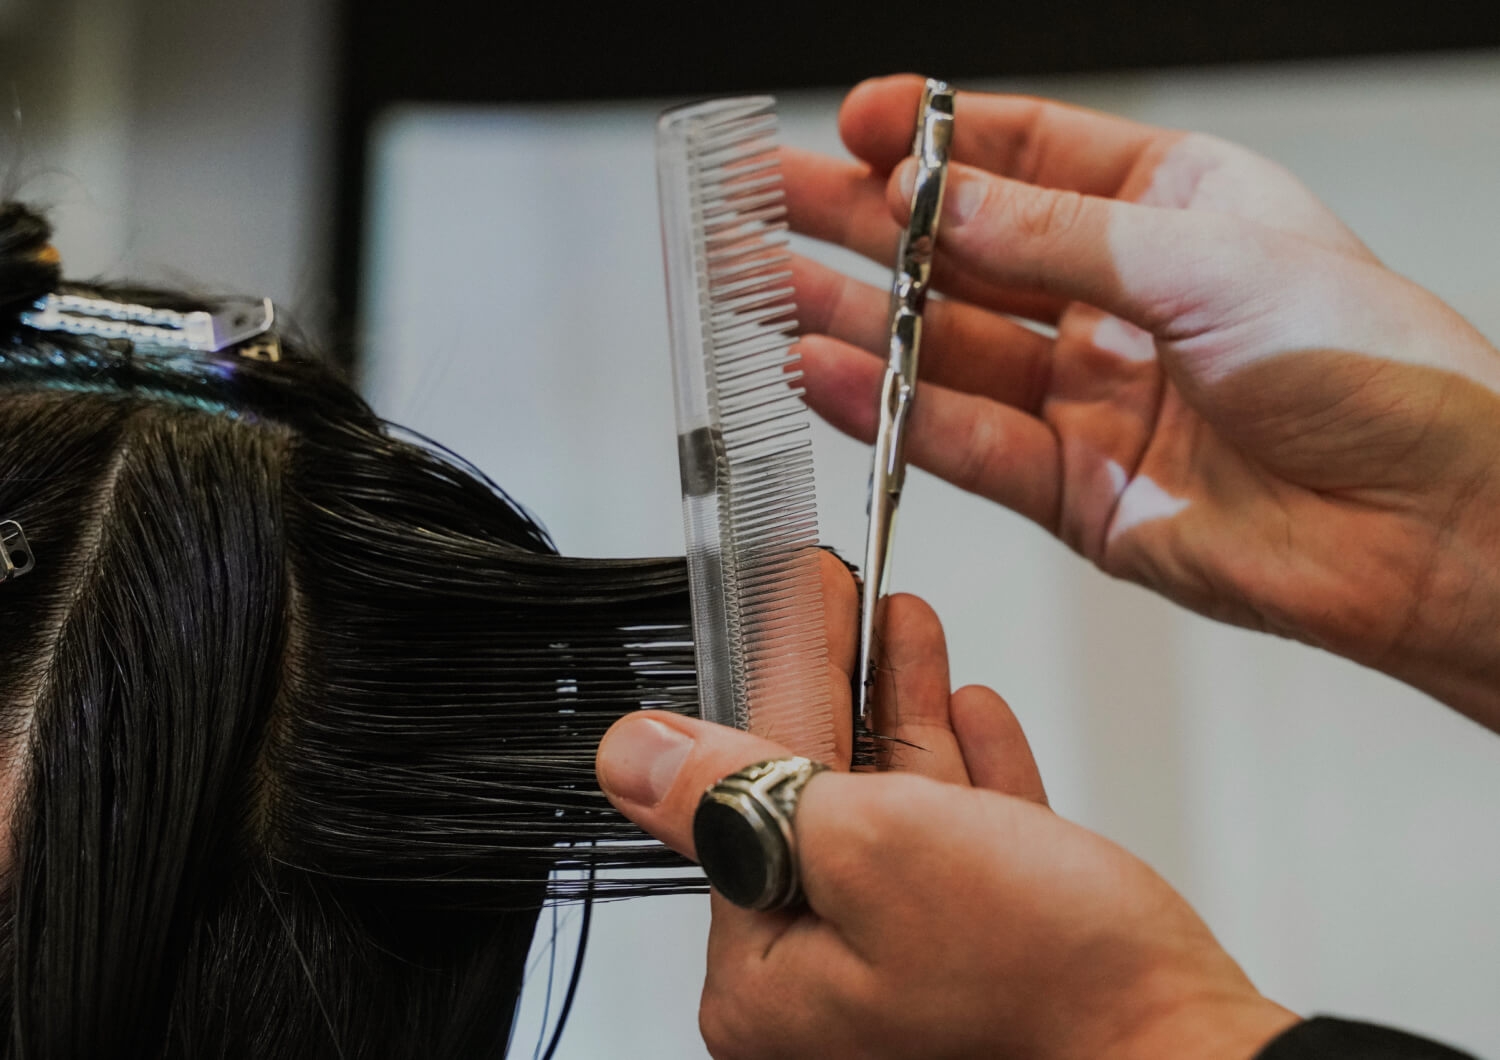 How to Hold Scissors While Cutting Hair - Howcast